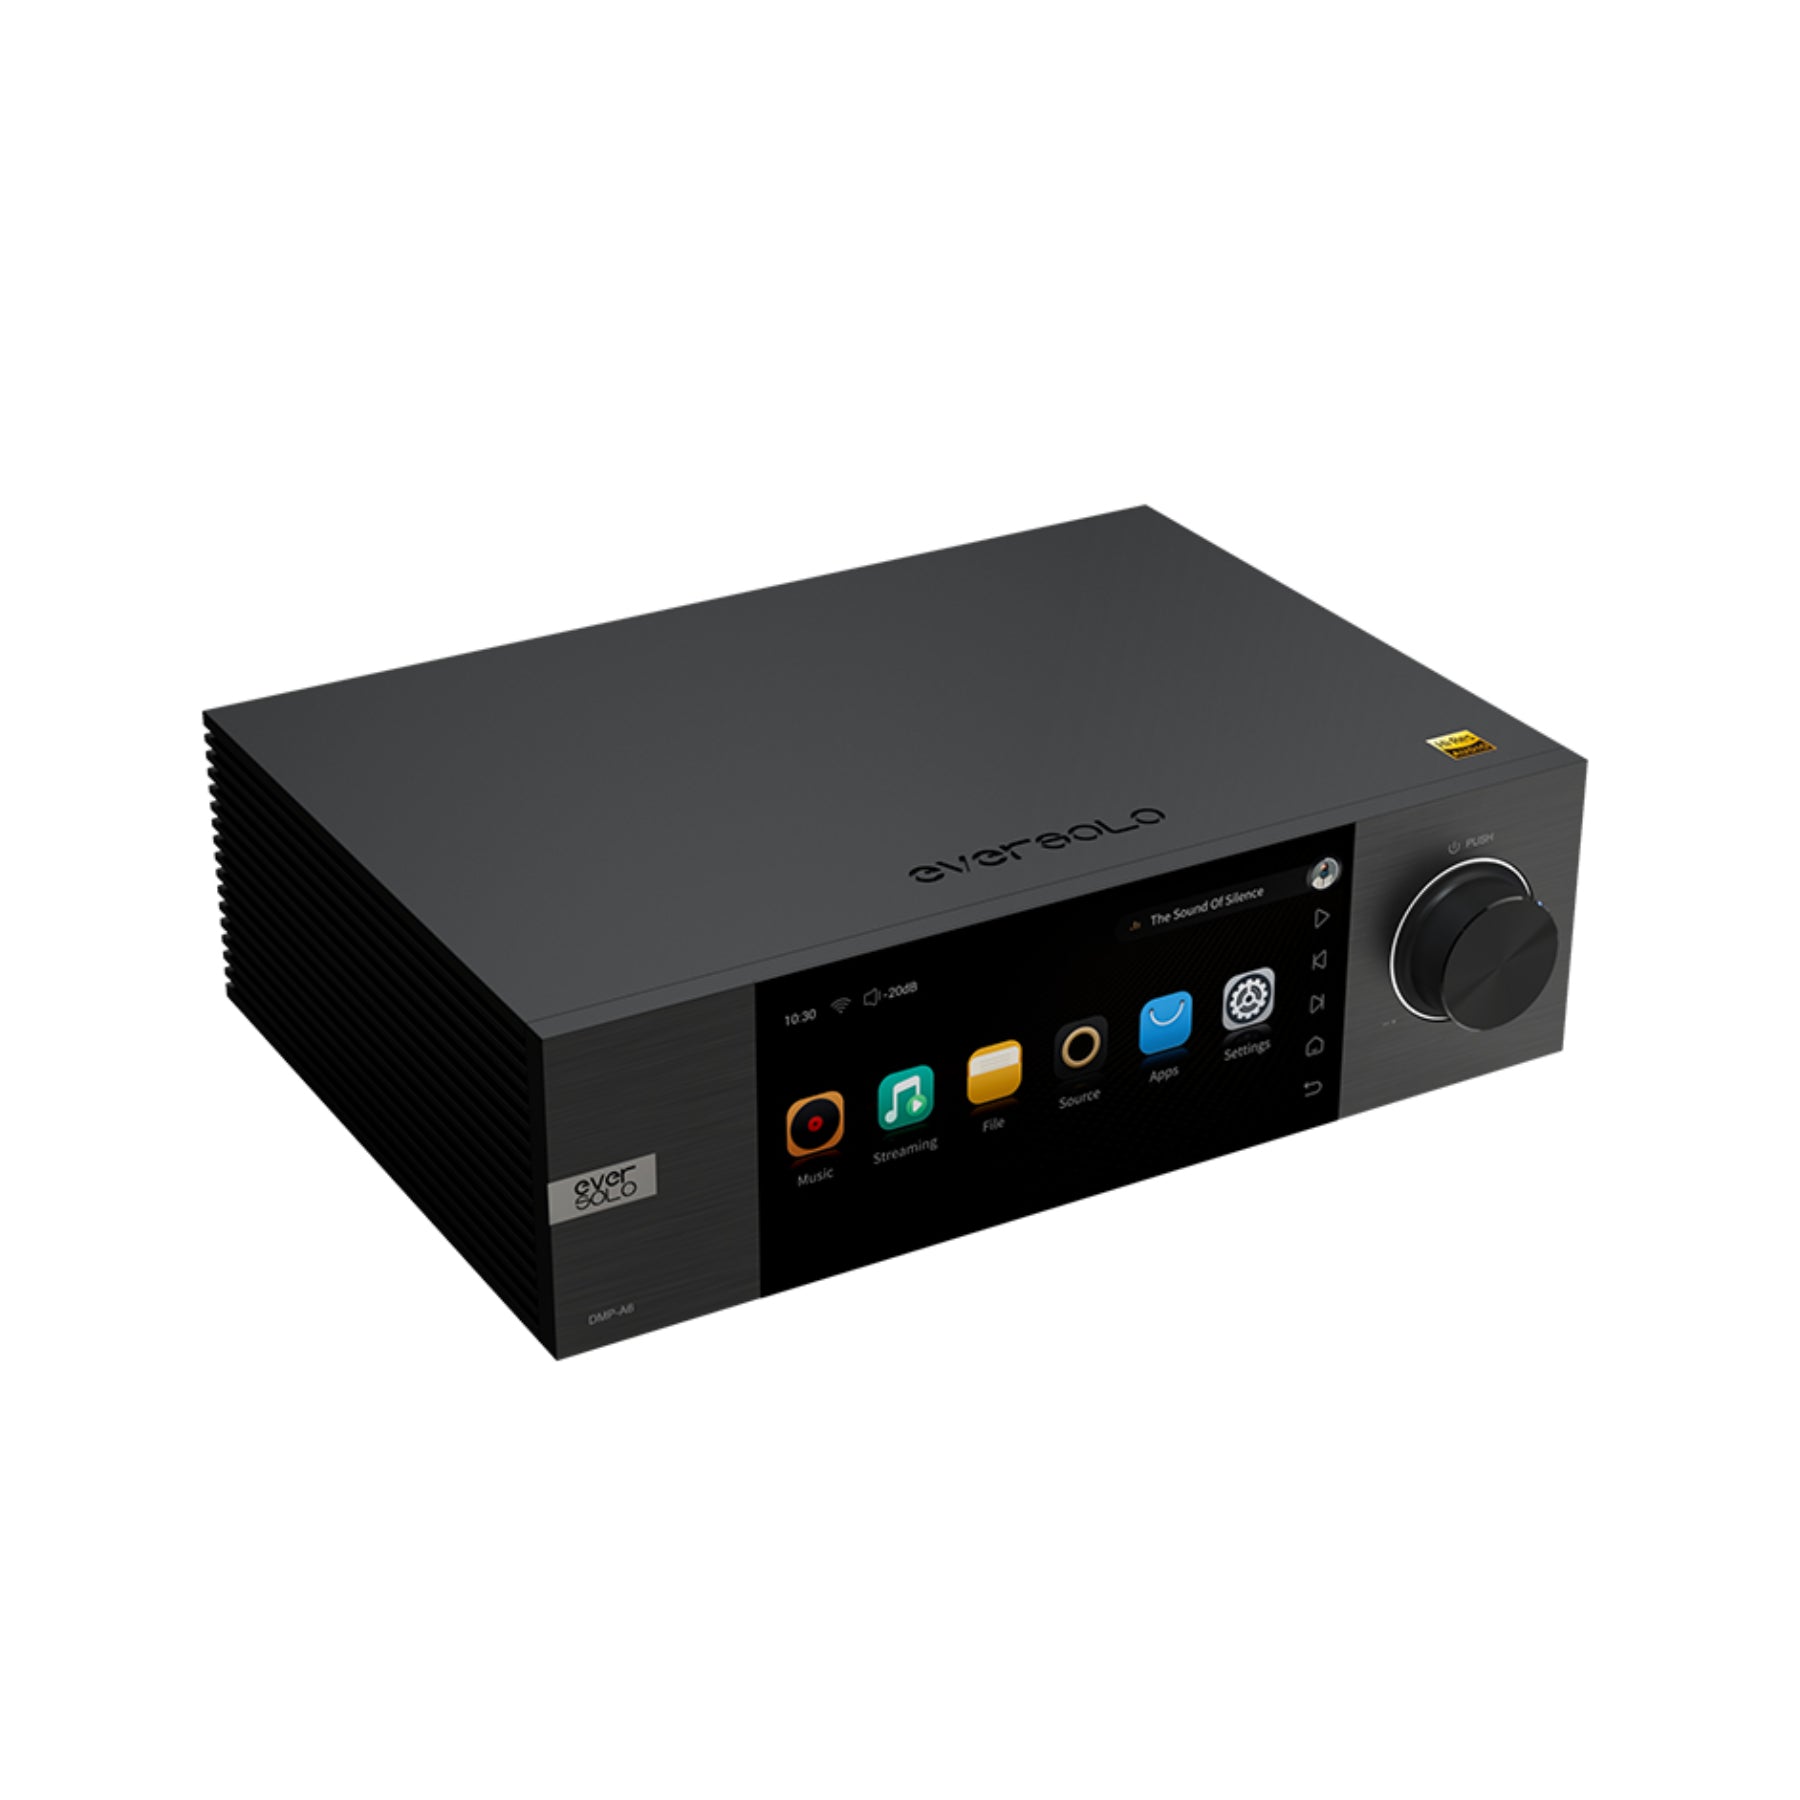 Eversolo DMP-A6 - Your Digital Audio on Another Level - iiWi reviews